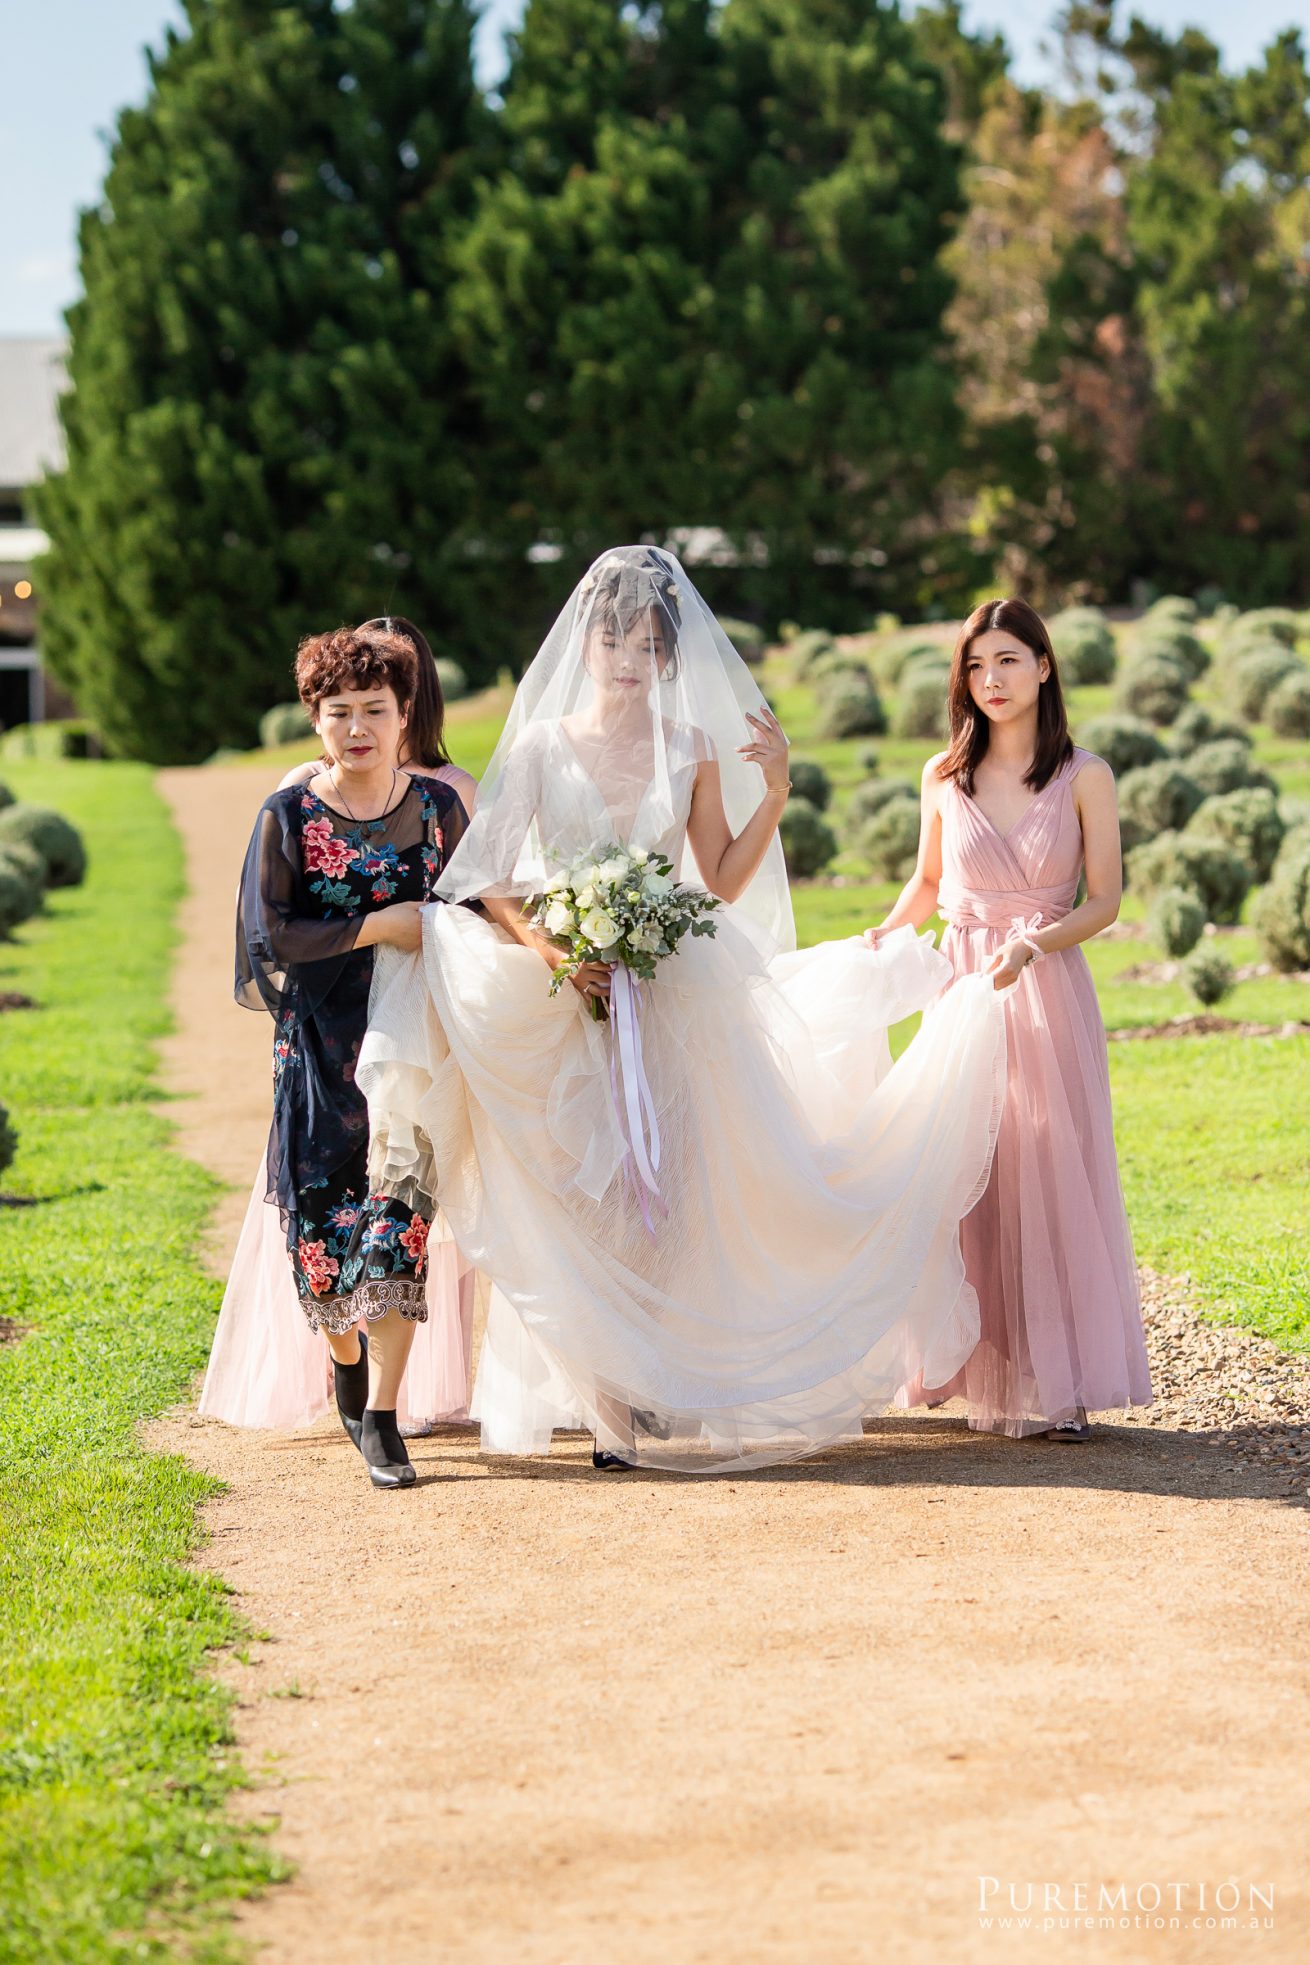 190323 Puremotion Wedding Photography Kooroomba Lavender Alex Huang ArielRico_Edited-0030